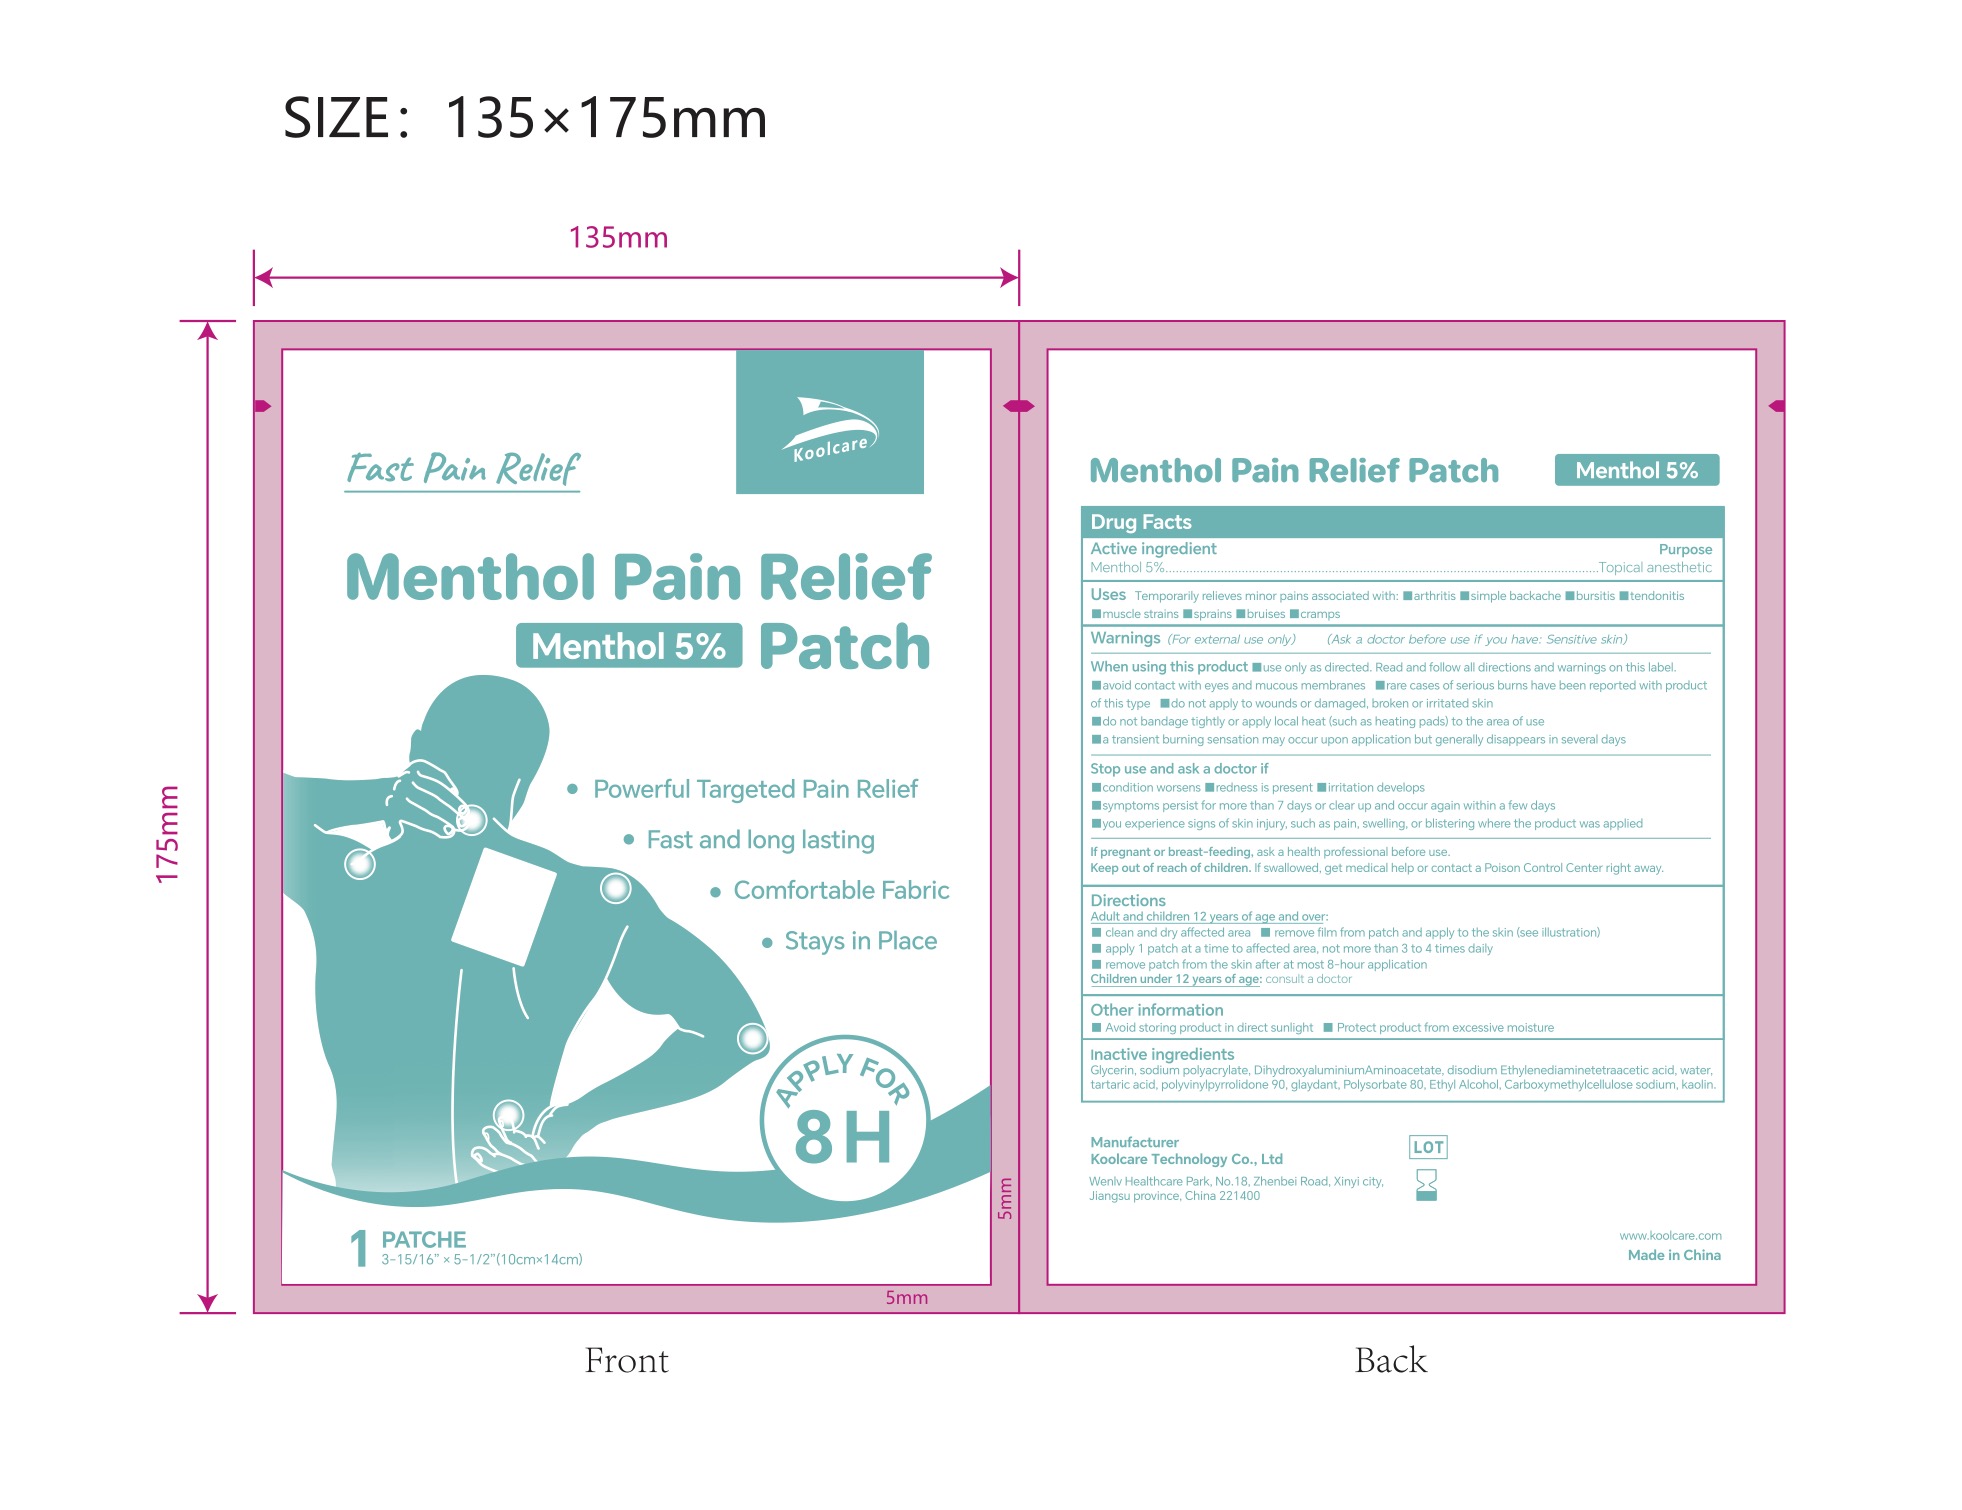 5% Menthol Pain Relief Patch NDC: <a href=/NDC/84205-004-00>84205-004-00</a>